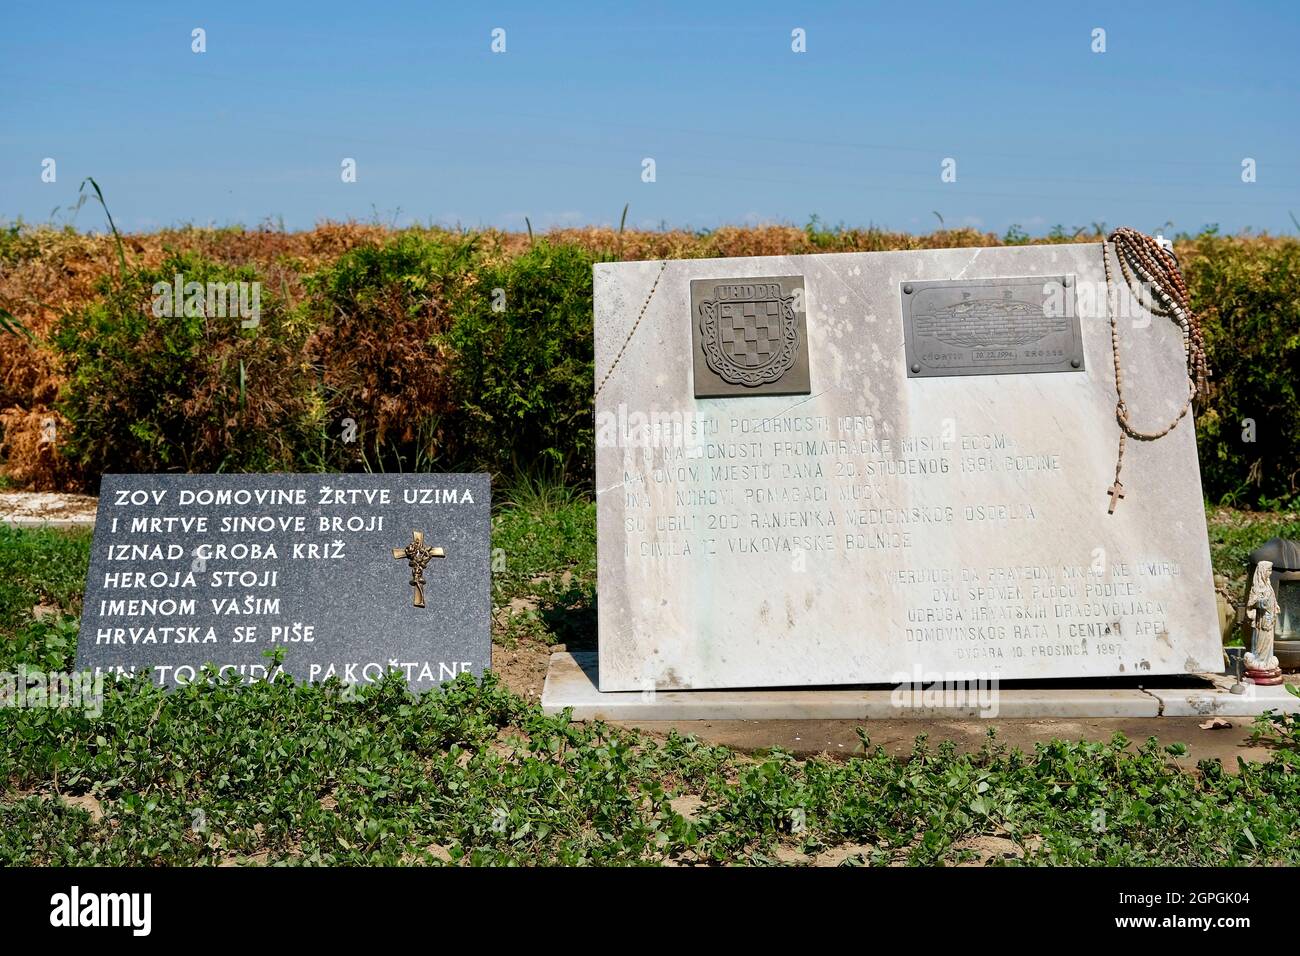 Croatia, Slavonia, Ovcara, Ovcara mass grave, November 20, 1991, 264 people from Vukovar hospital will be tortured and executed by Serbian forces, 7 people will be indicted by the ICTY for crimes against humanity and war crime Stock Photo